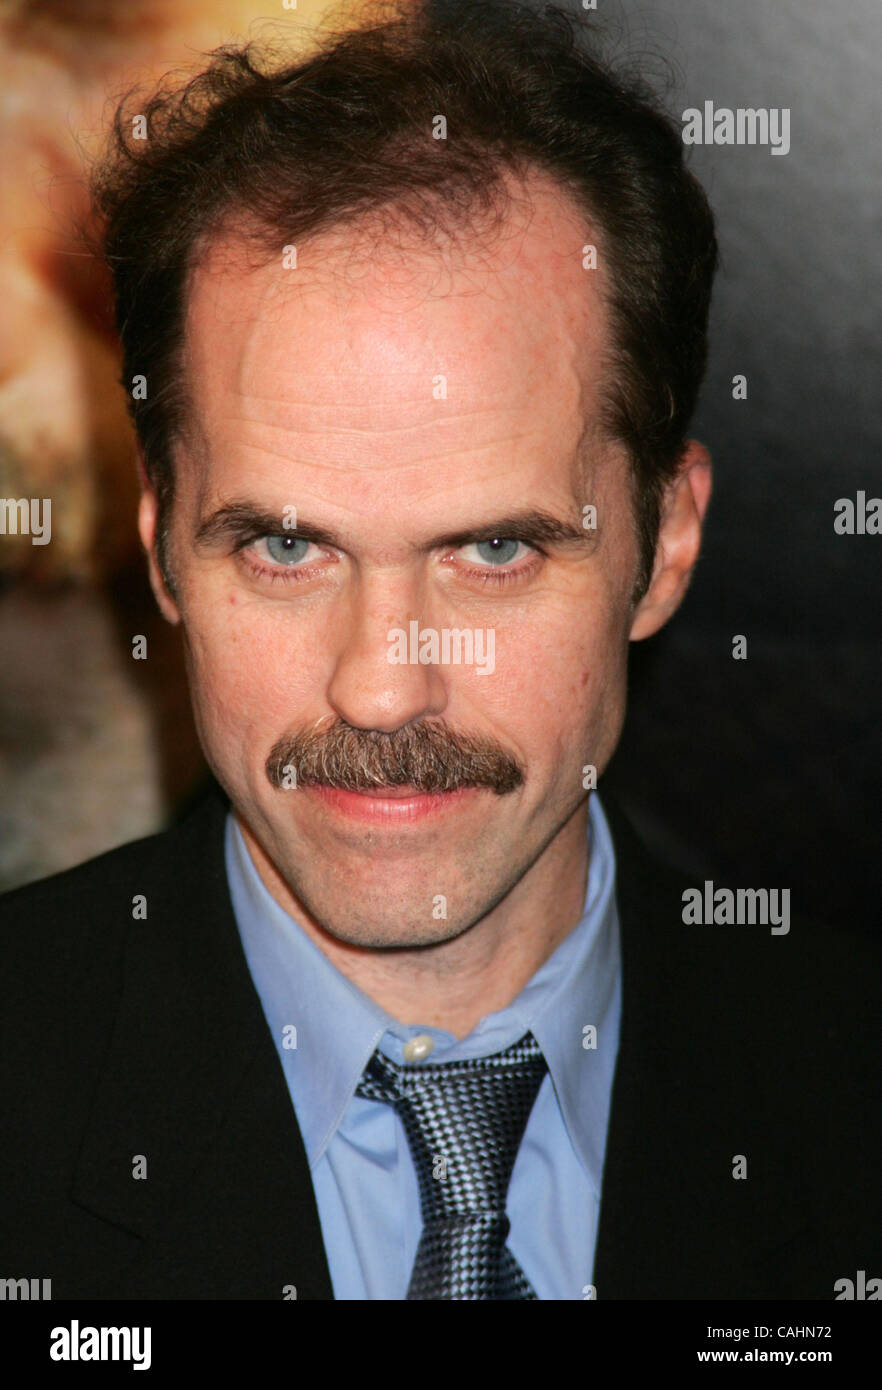 Dec 10, 2007 - New York, NY, USA - Actor KEVIN J. O'CONNOR at the New York premiere of 'There Will Be Blood' held at the Ziegfeld Theater. (Credit Image: © Nancy Kaszerman/ZUMA Press) Stock Photo